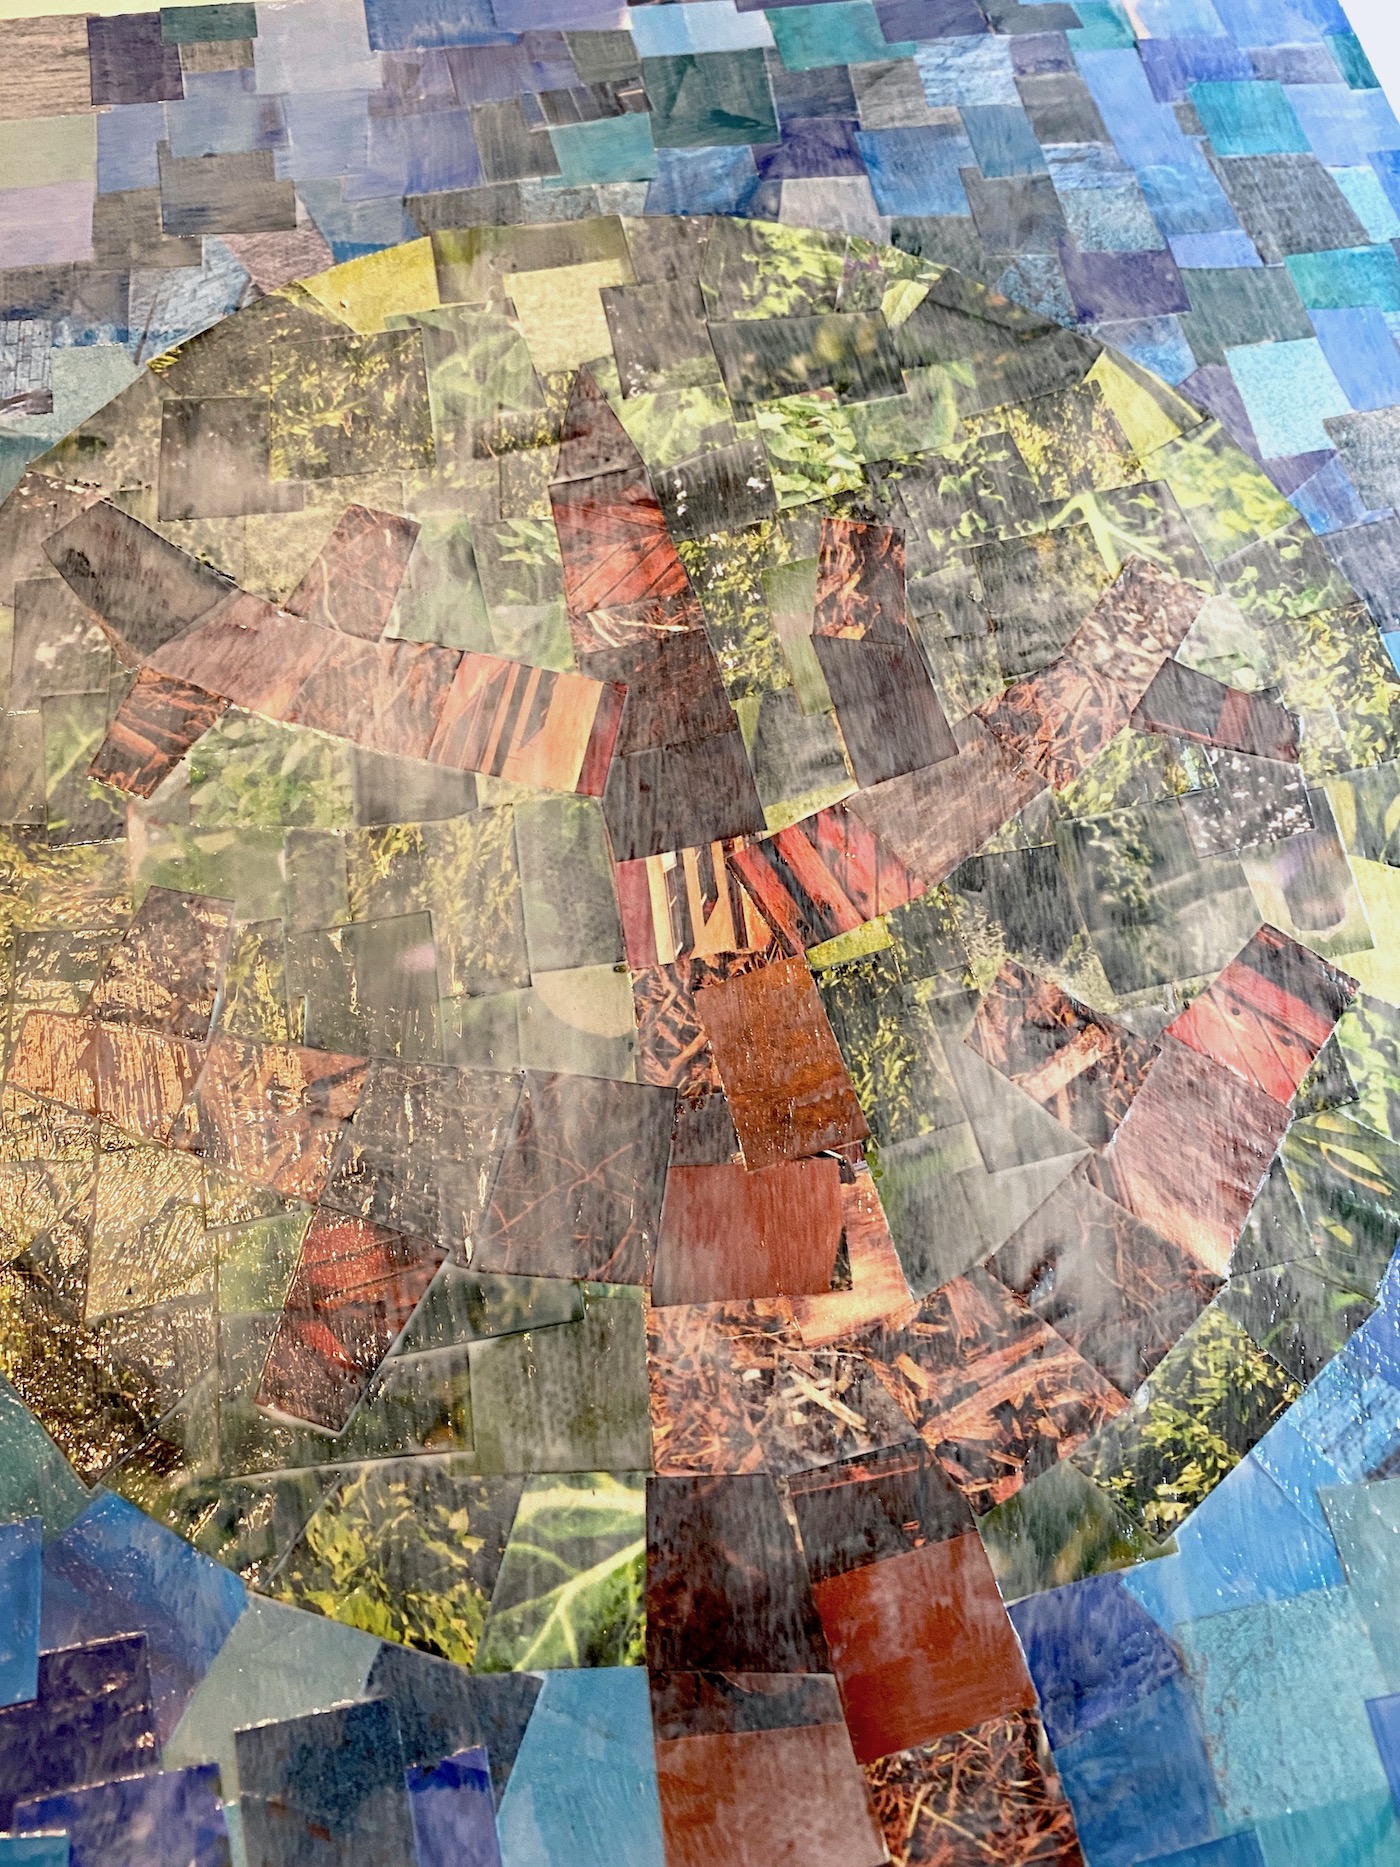 Wet layer of Mod Podge over the magazine collage art